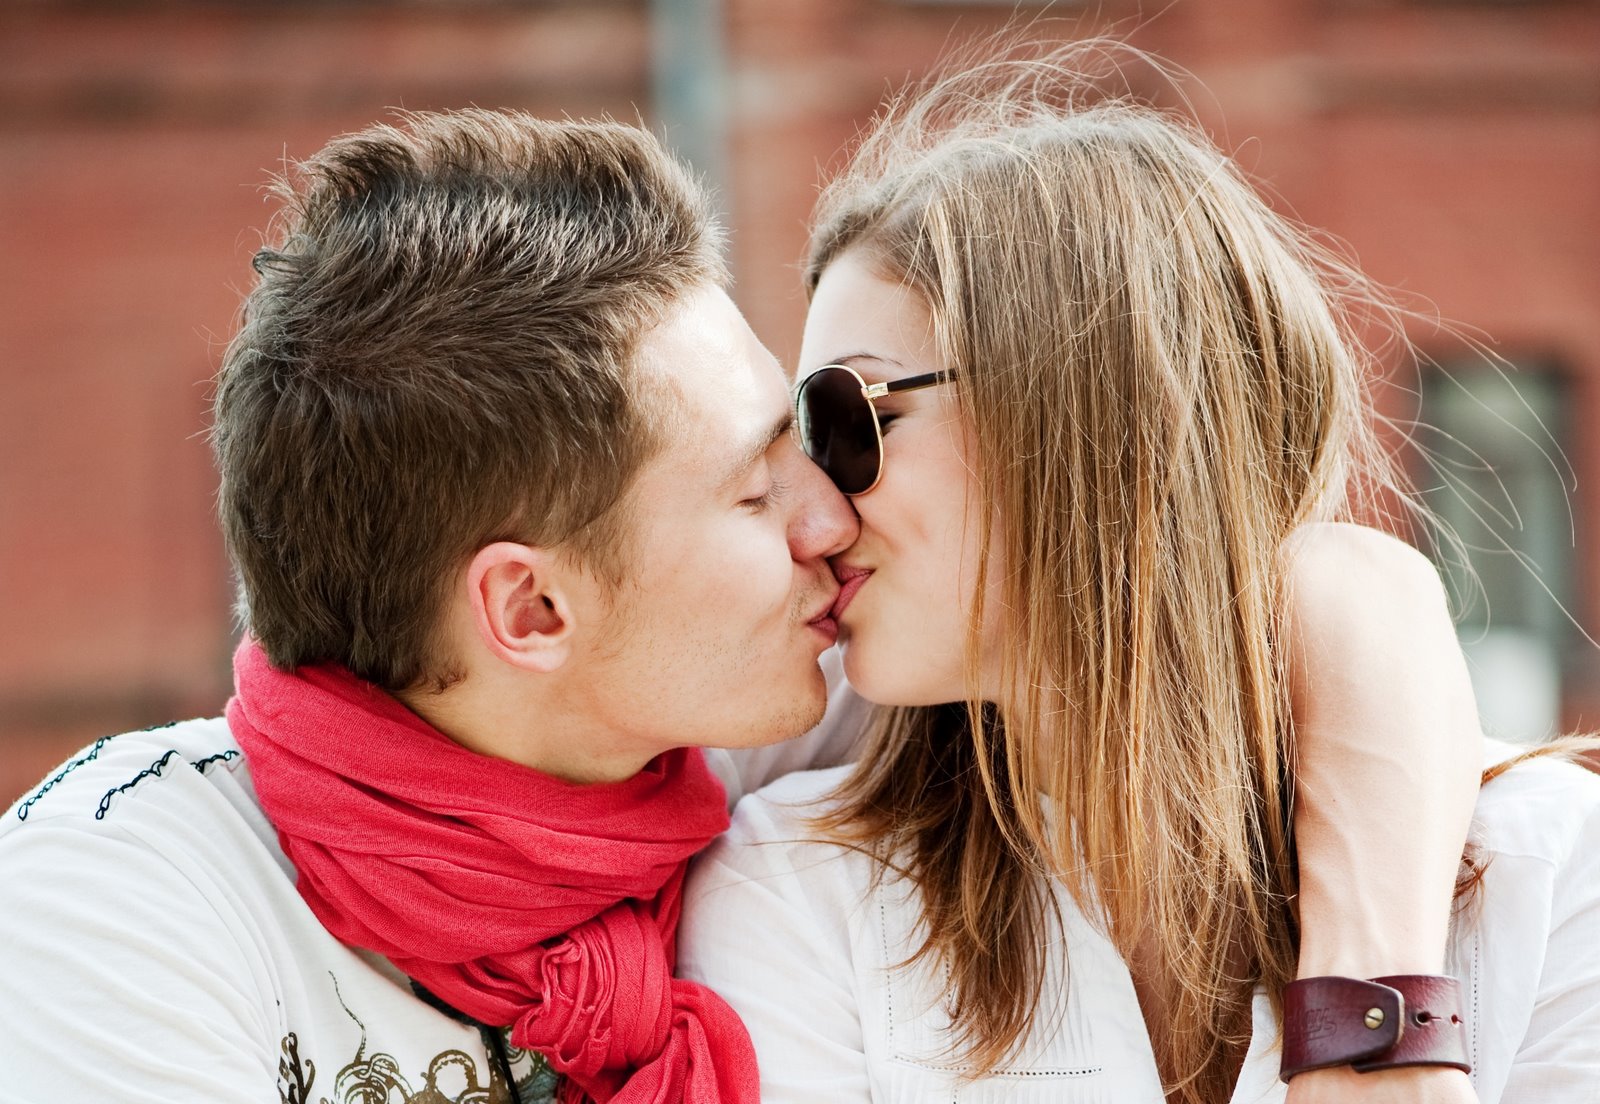 Kissing Pictures Of Love Couple Hd Kissing Wallpapers - Kiss Love Wallpaper In Hd 1080p - HD Wallpaper 